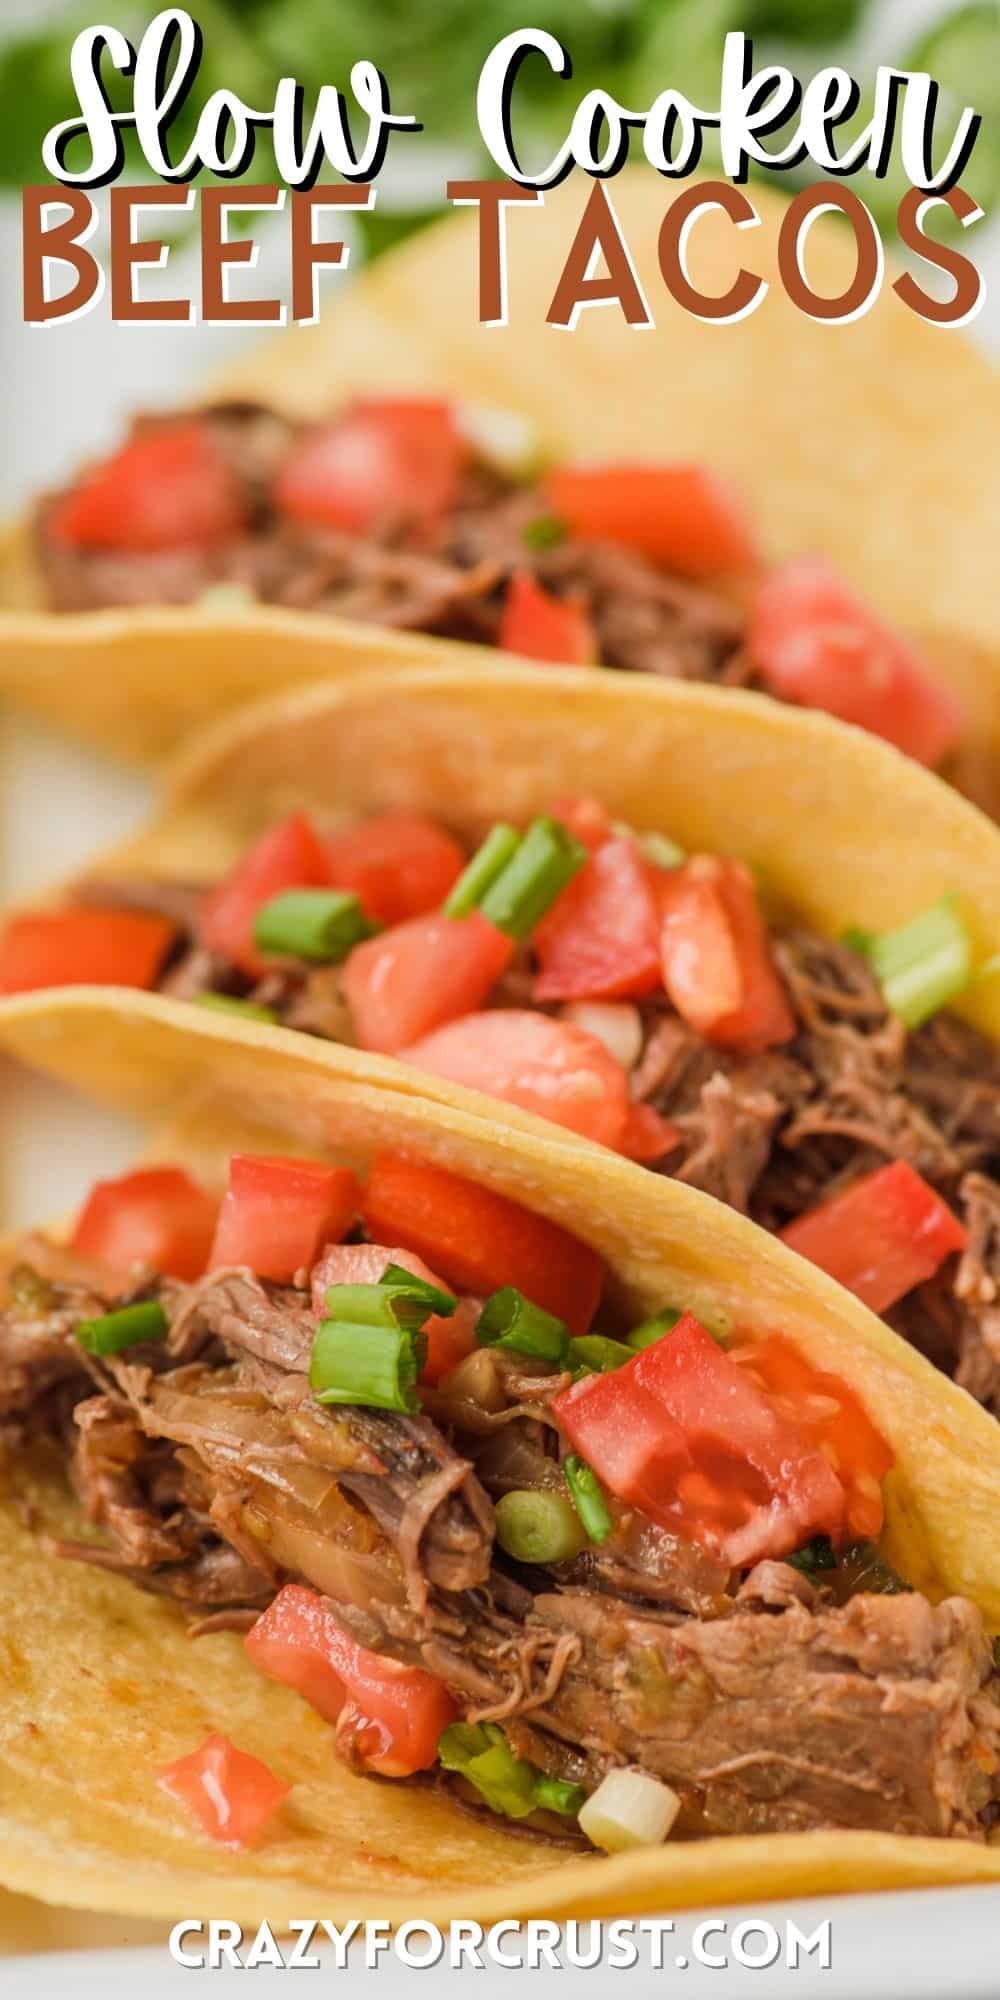 shredded beef in a tacos mixed with tomatoes and with words on the image.